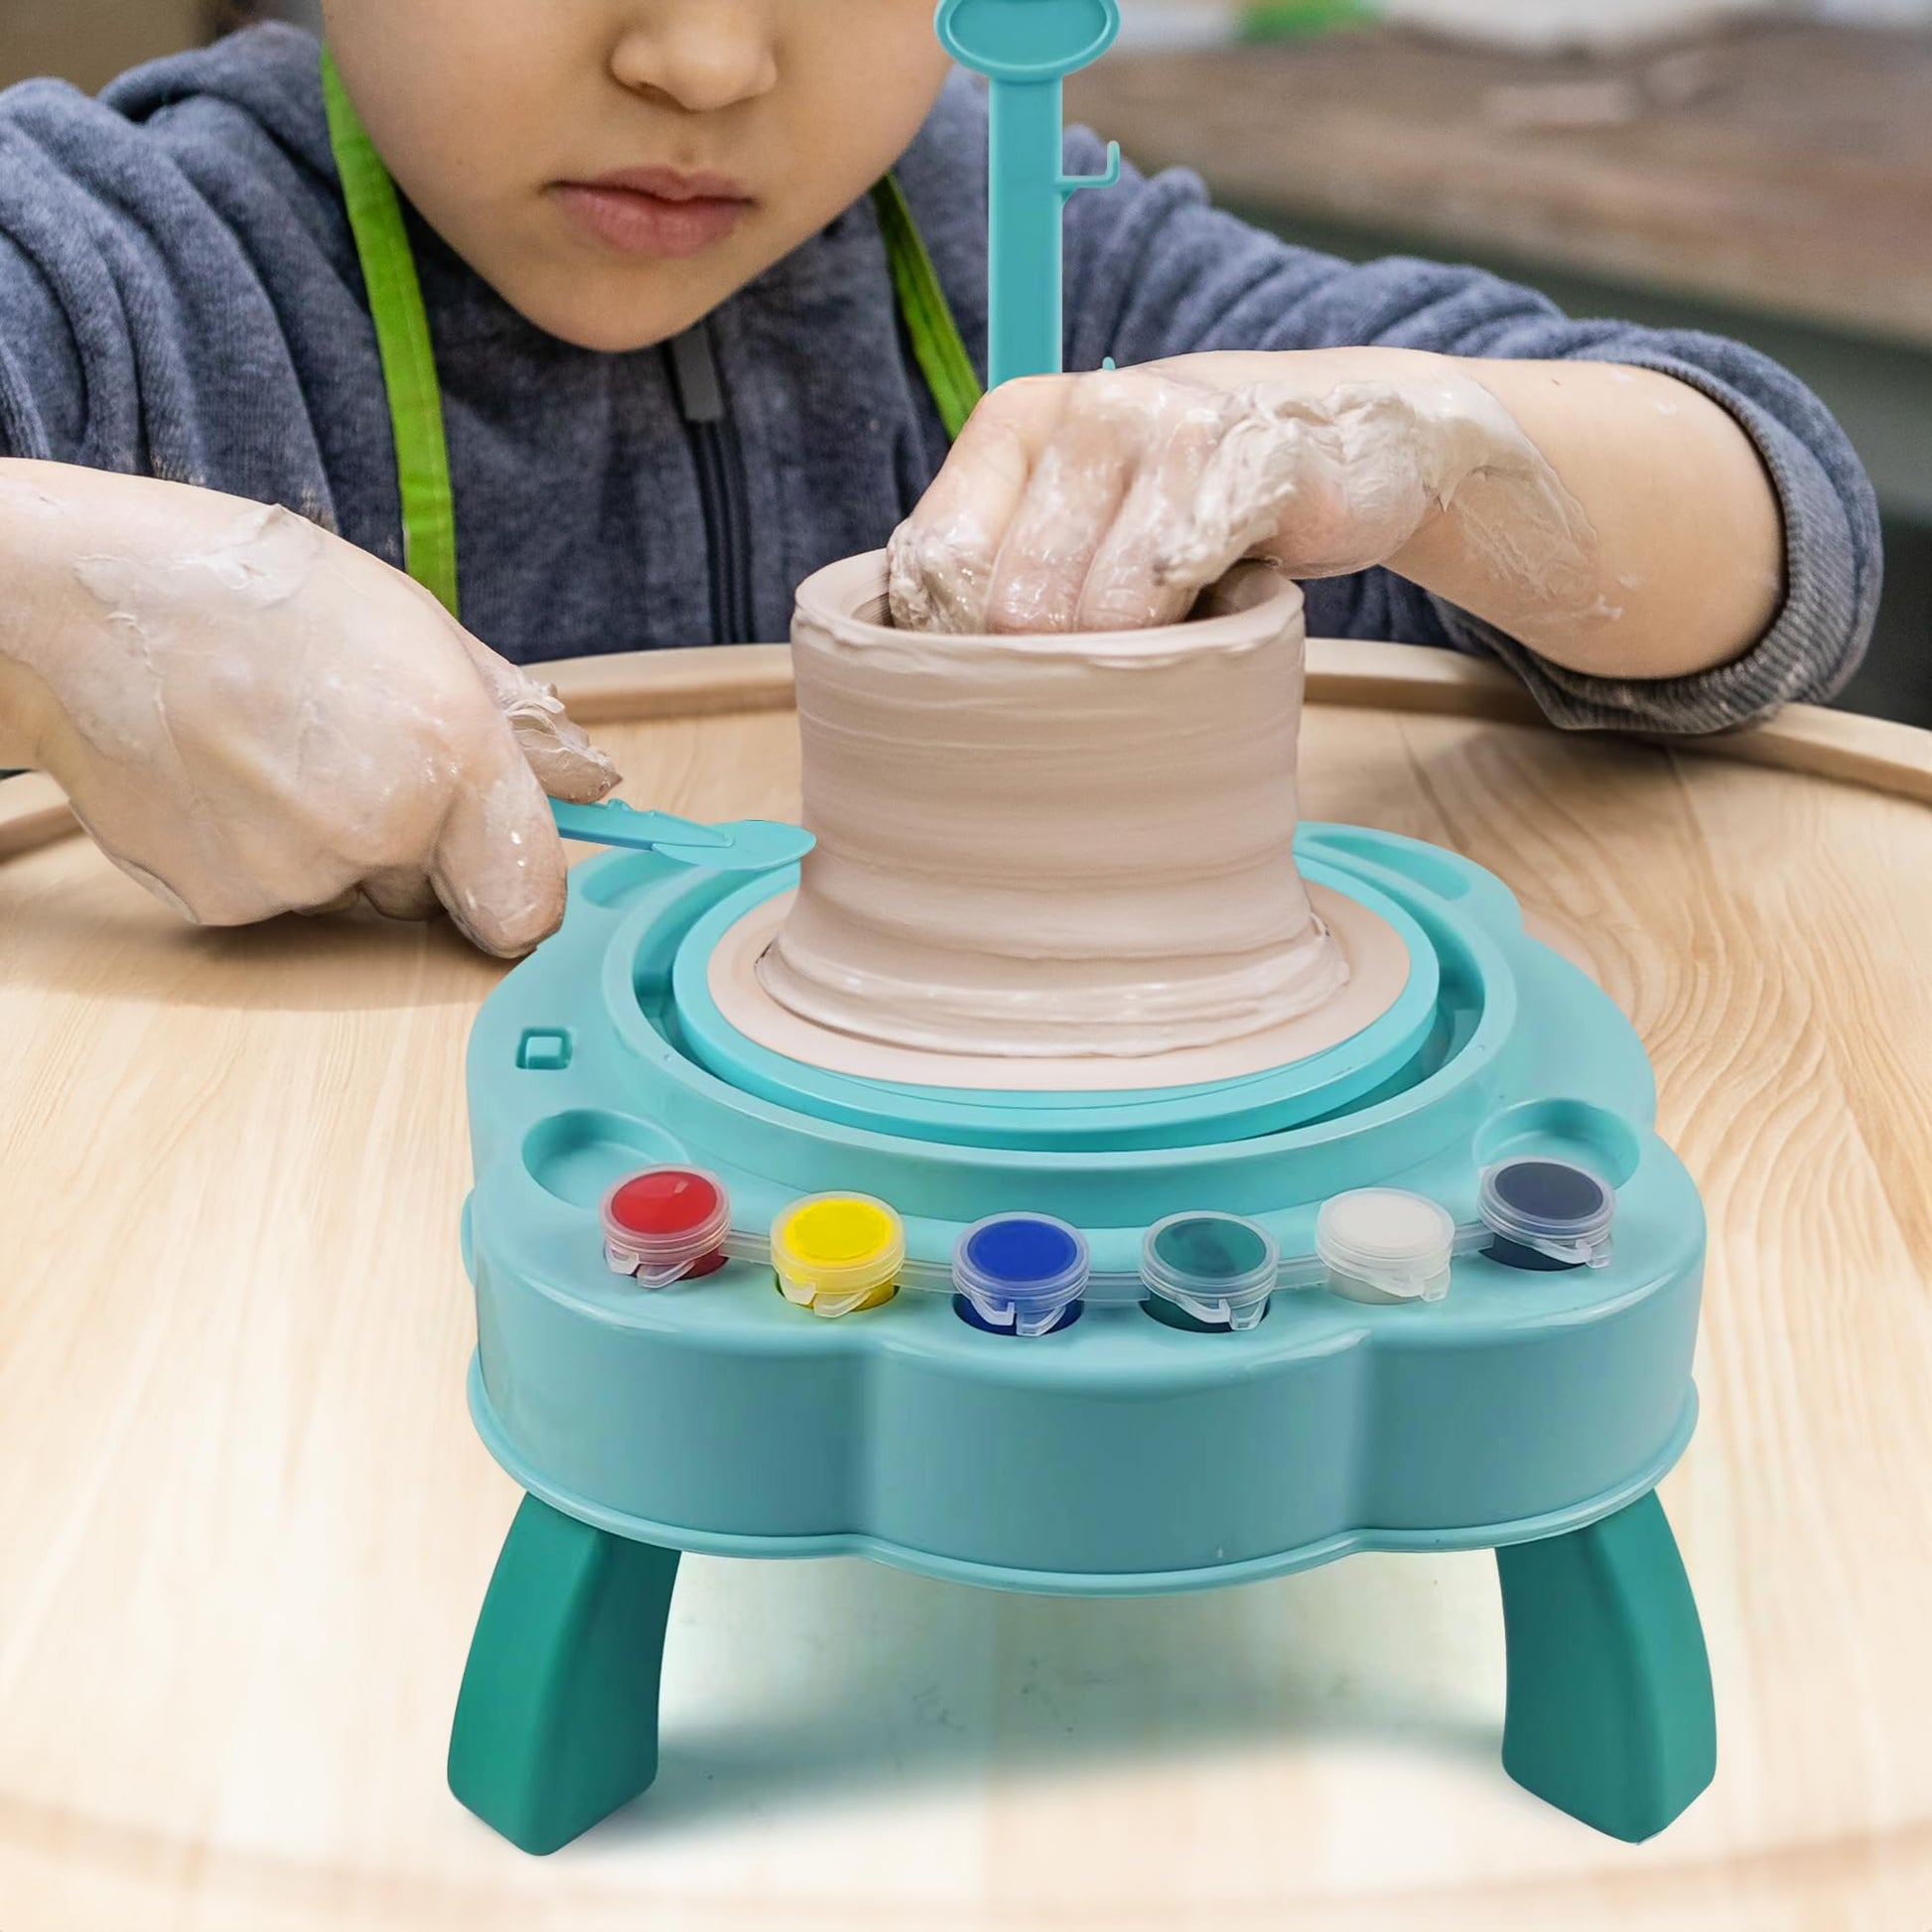  Skirfy Pottery Wheel for Kids-Clay Sculpting Tools